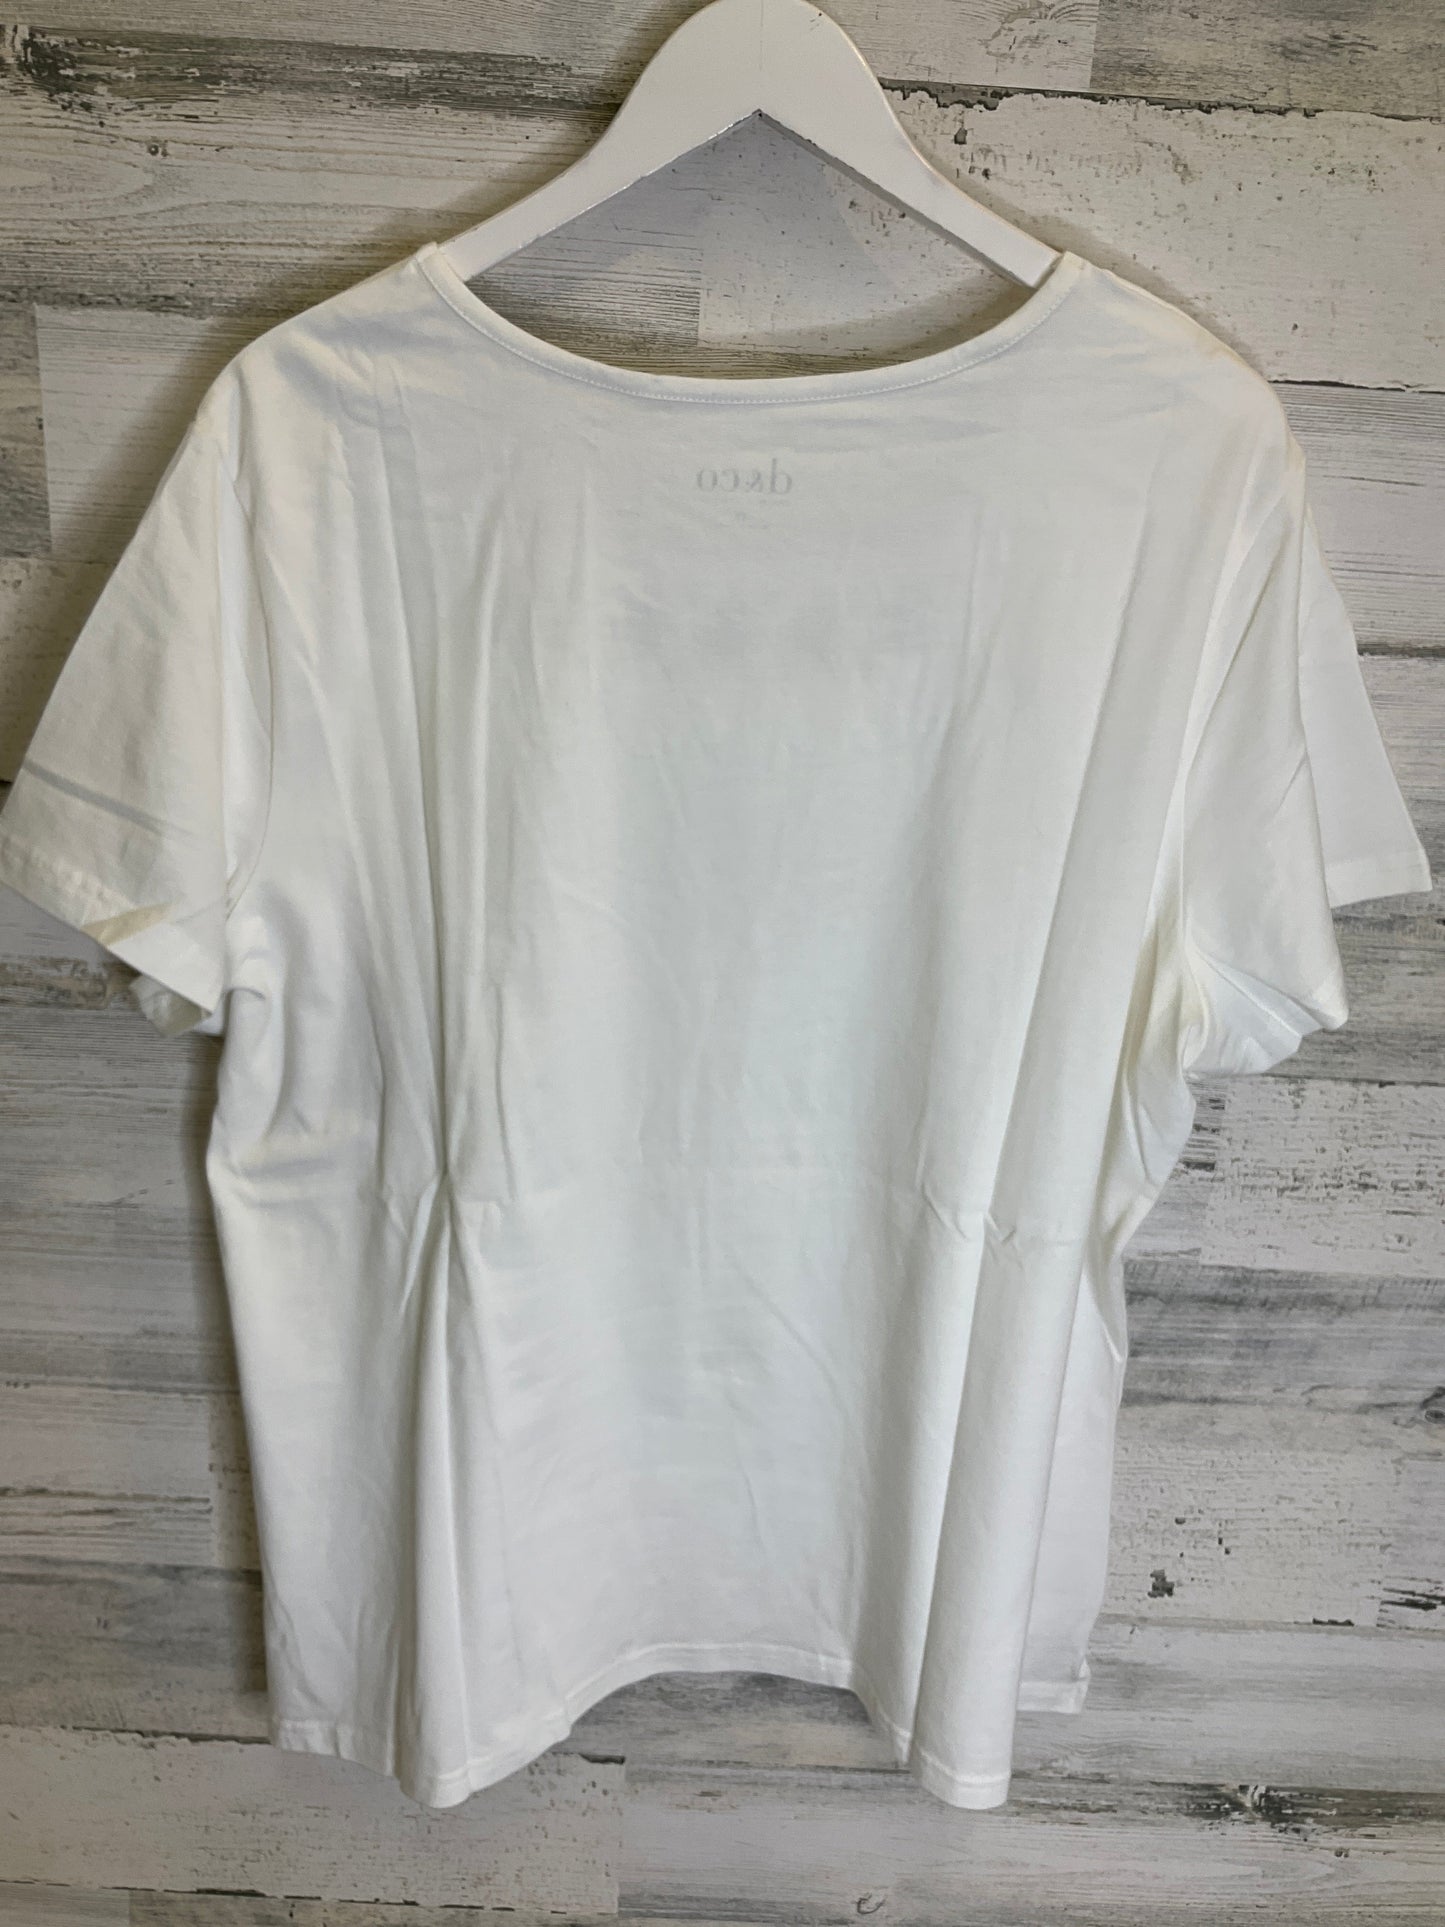 White Top Short Sleeve Denim And Company, Size 1x